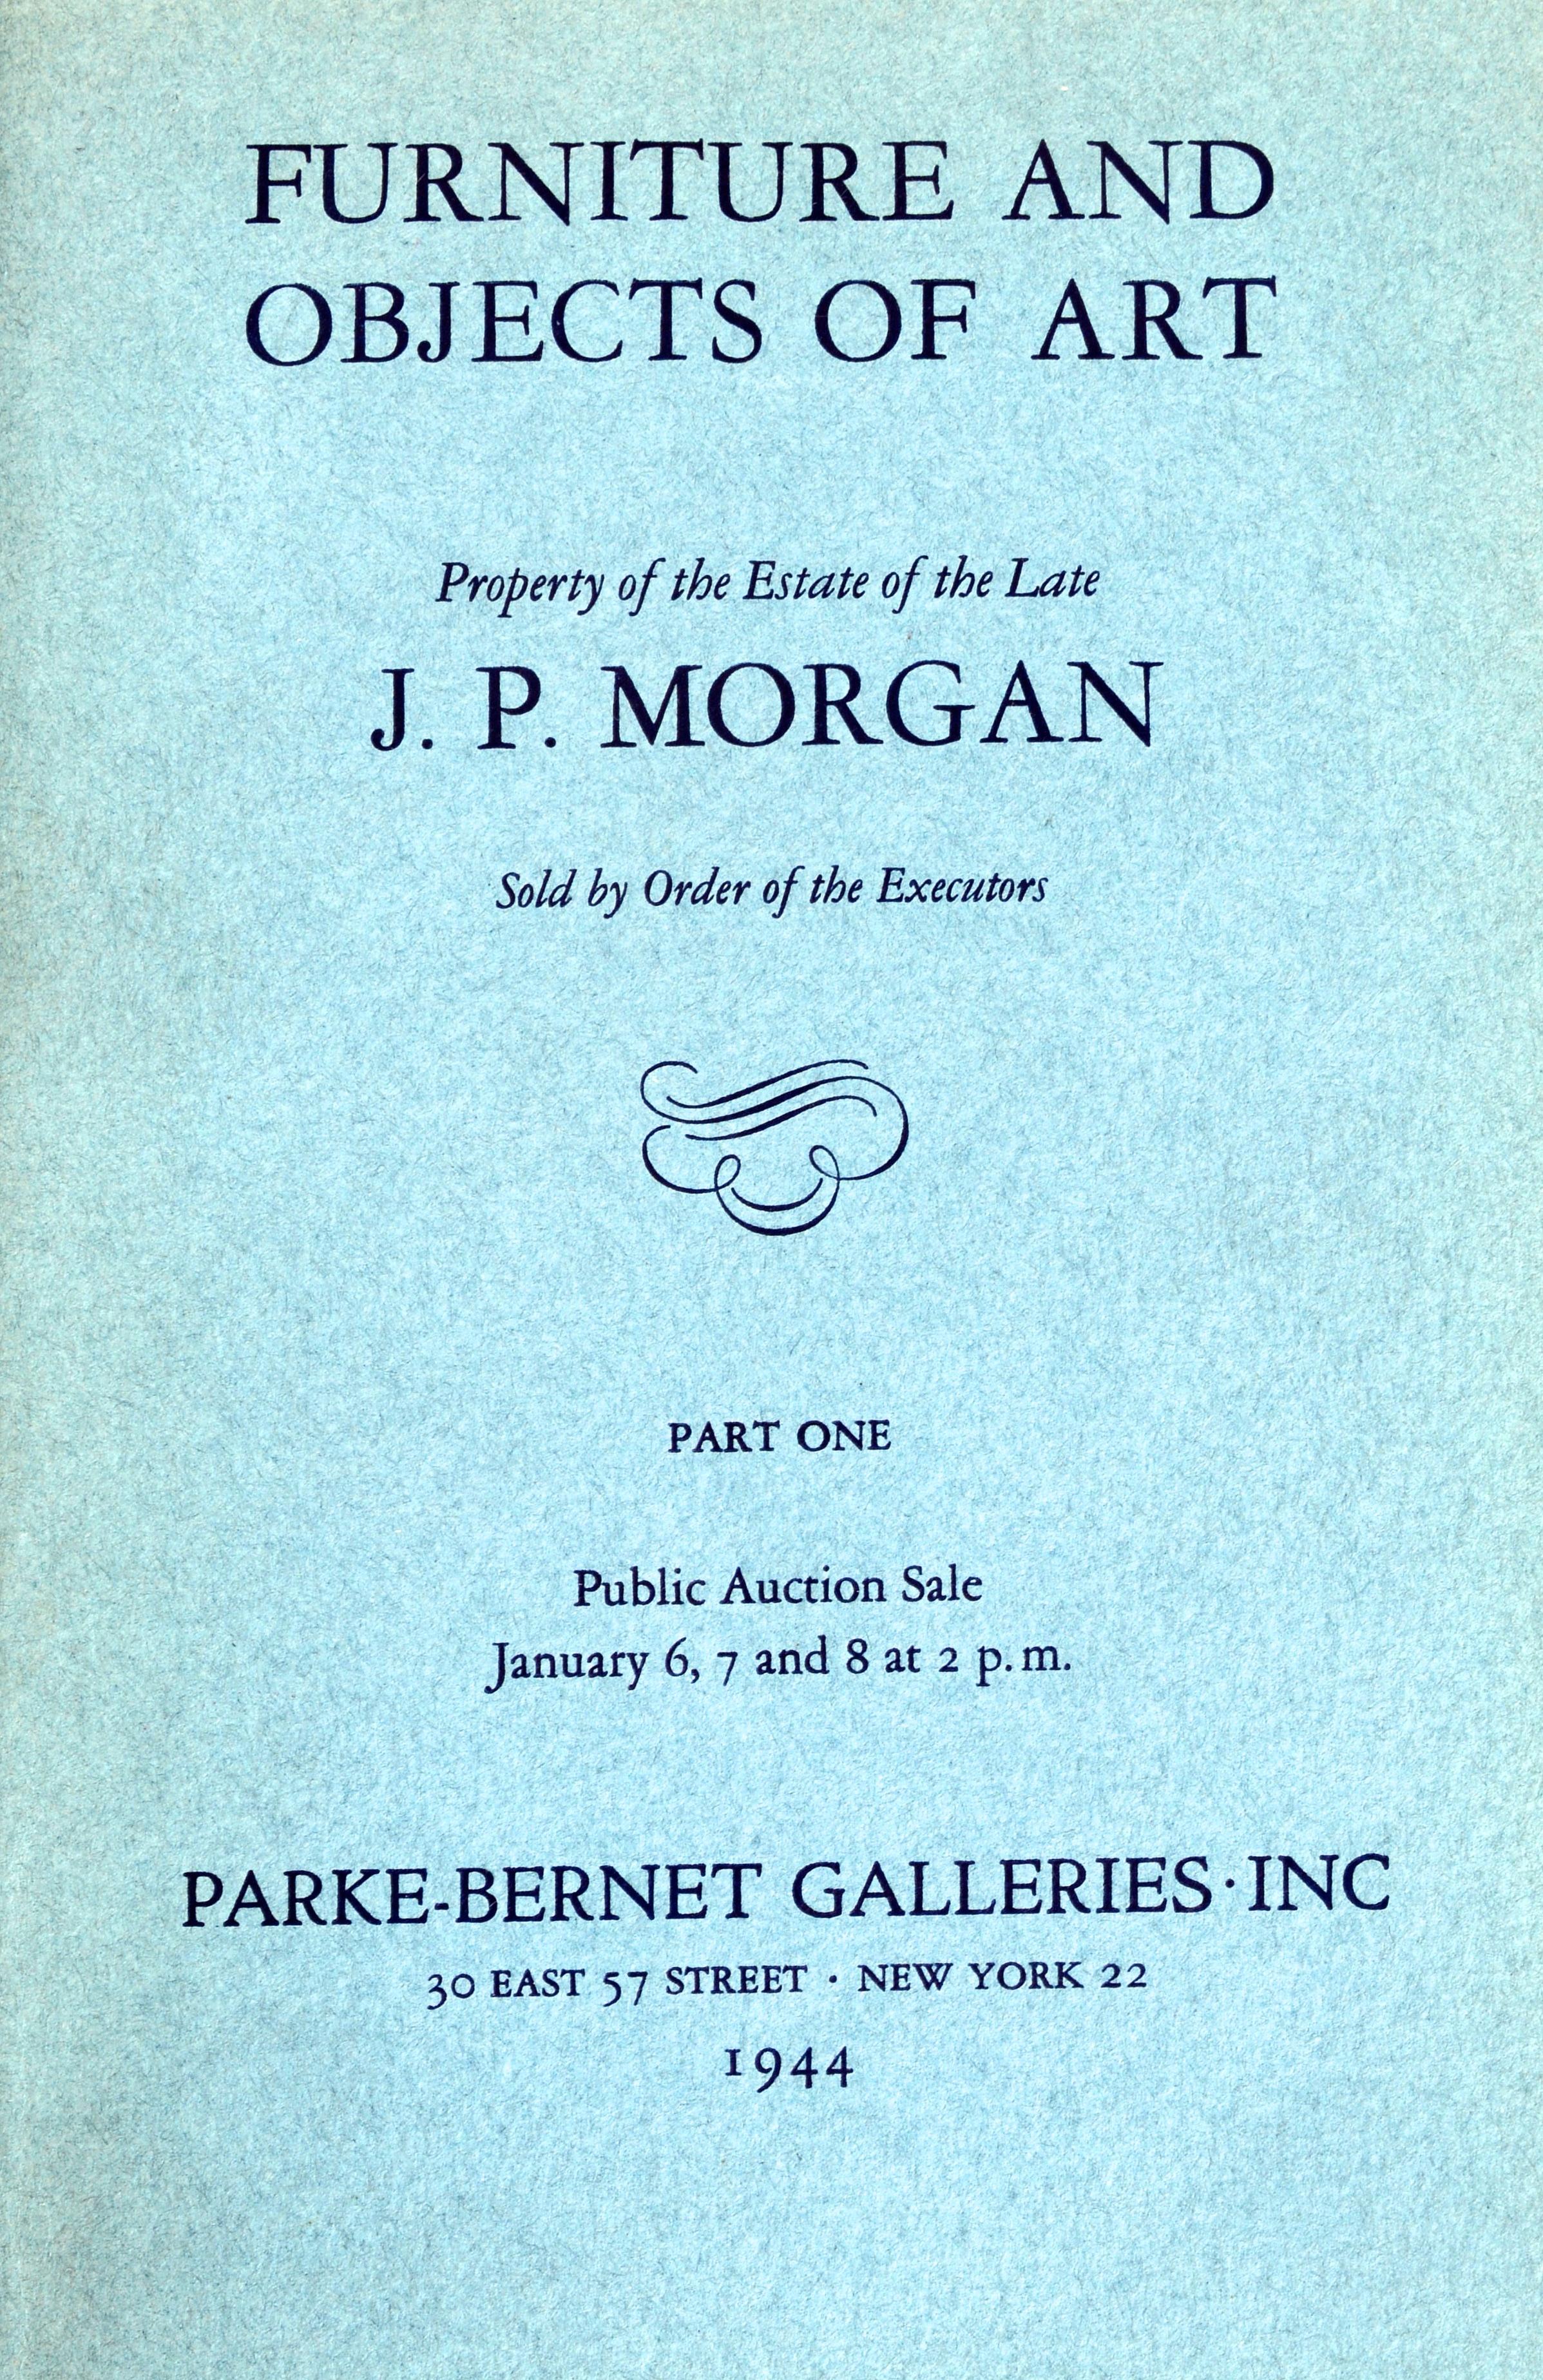 Property of the Estate of the Late J.P. Morgan, All 4 catalogs from the famous sale of J. P. Morgans estate from 1944 and they are bound into a hardcover book. The catalog lots have selling prices noted in pencil. Sale #1: Furniture and Objects of